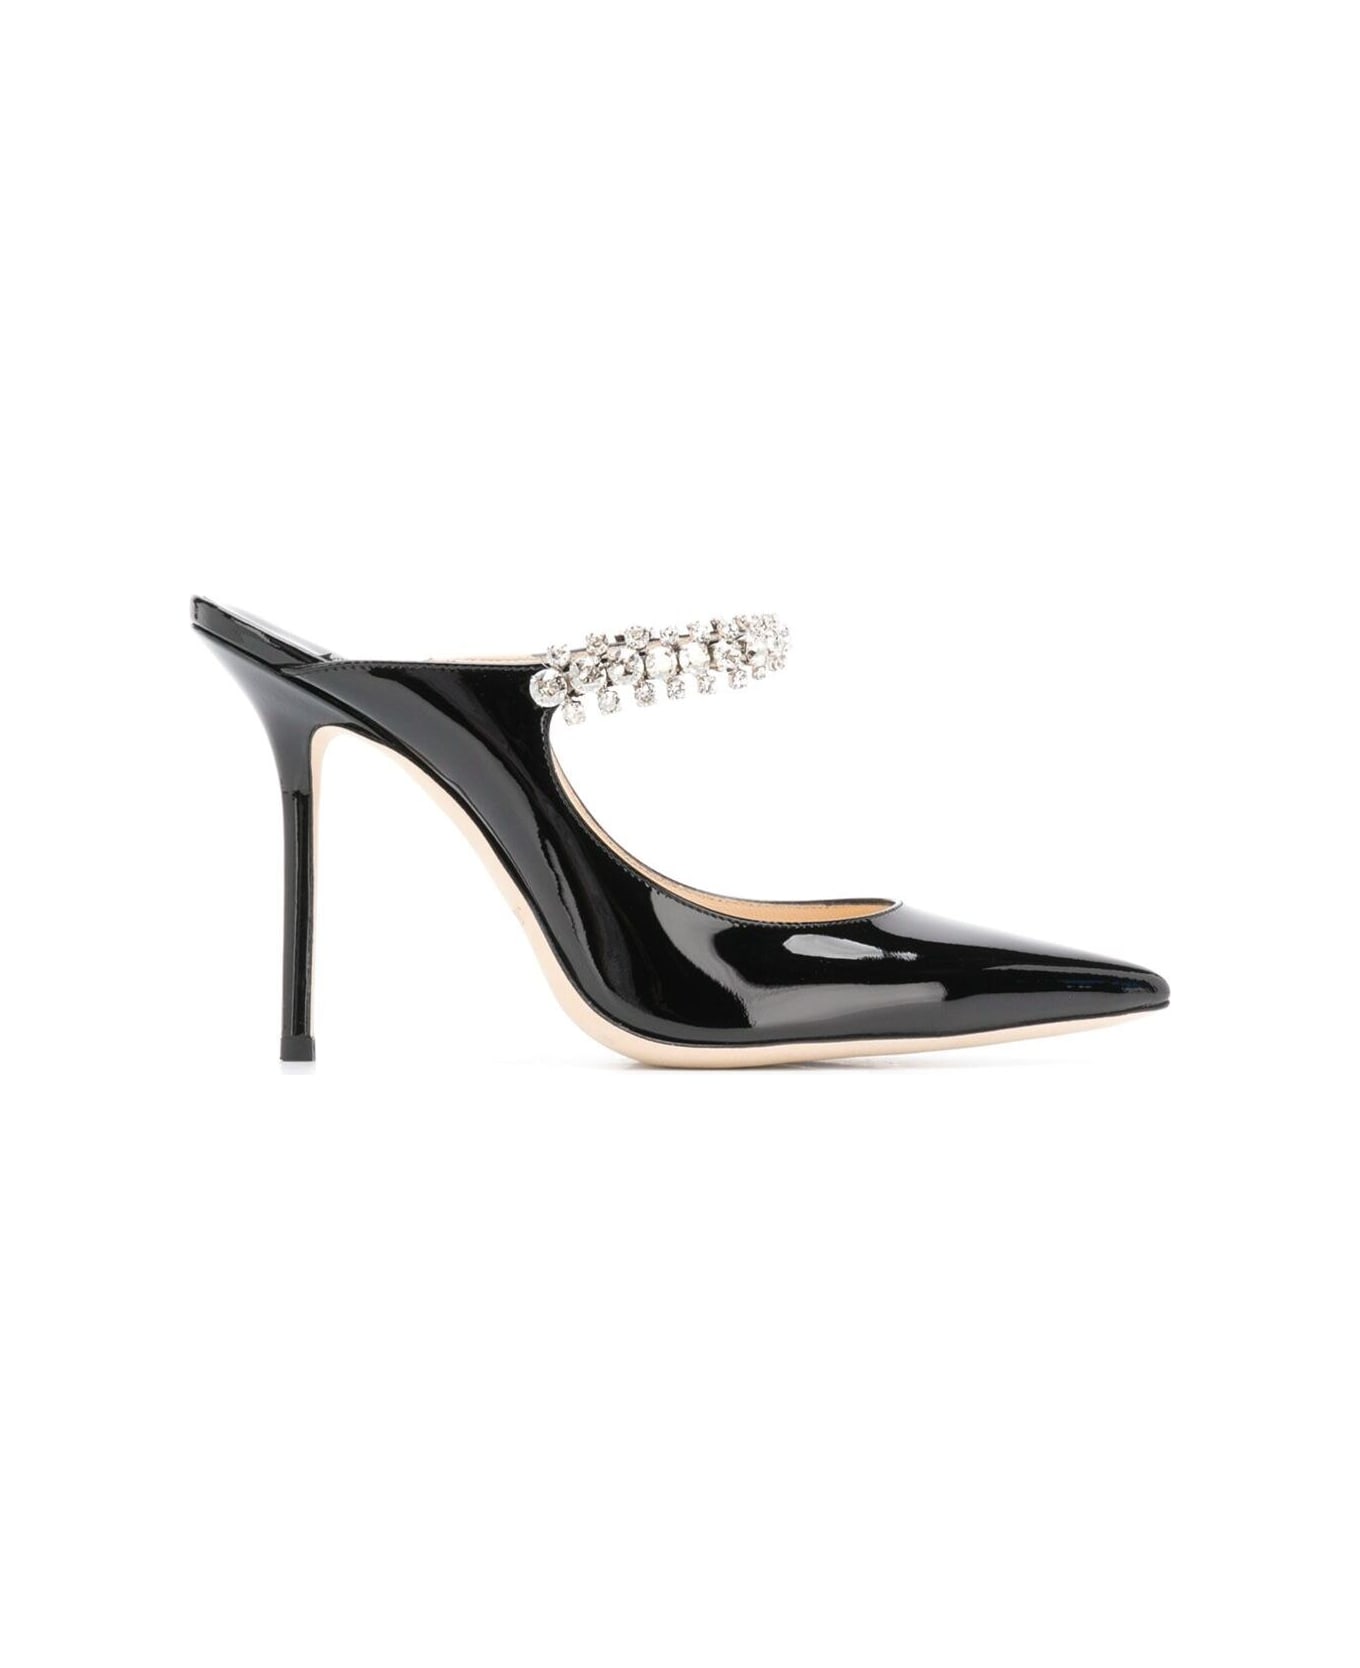 Jimmy Choo Black Pumps With Crystal Strap In Patent Leather Woman - Black